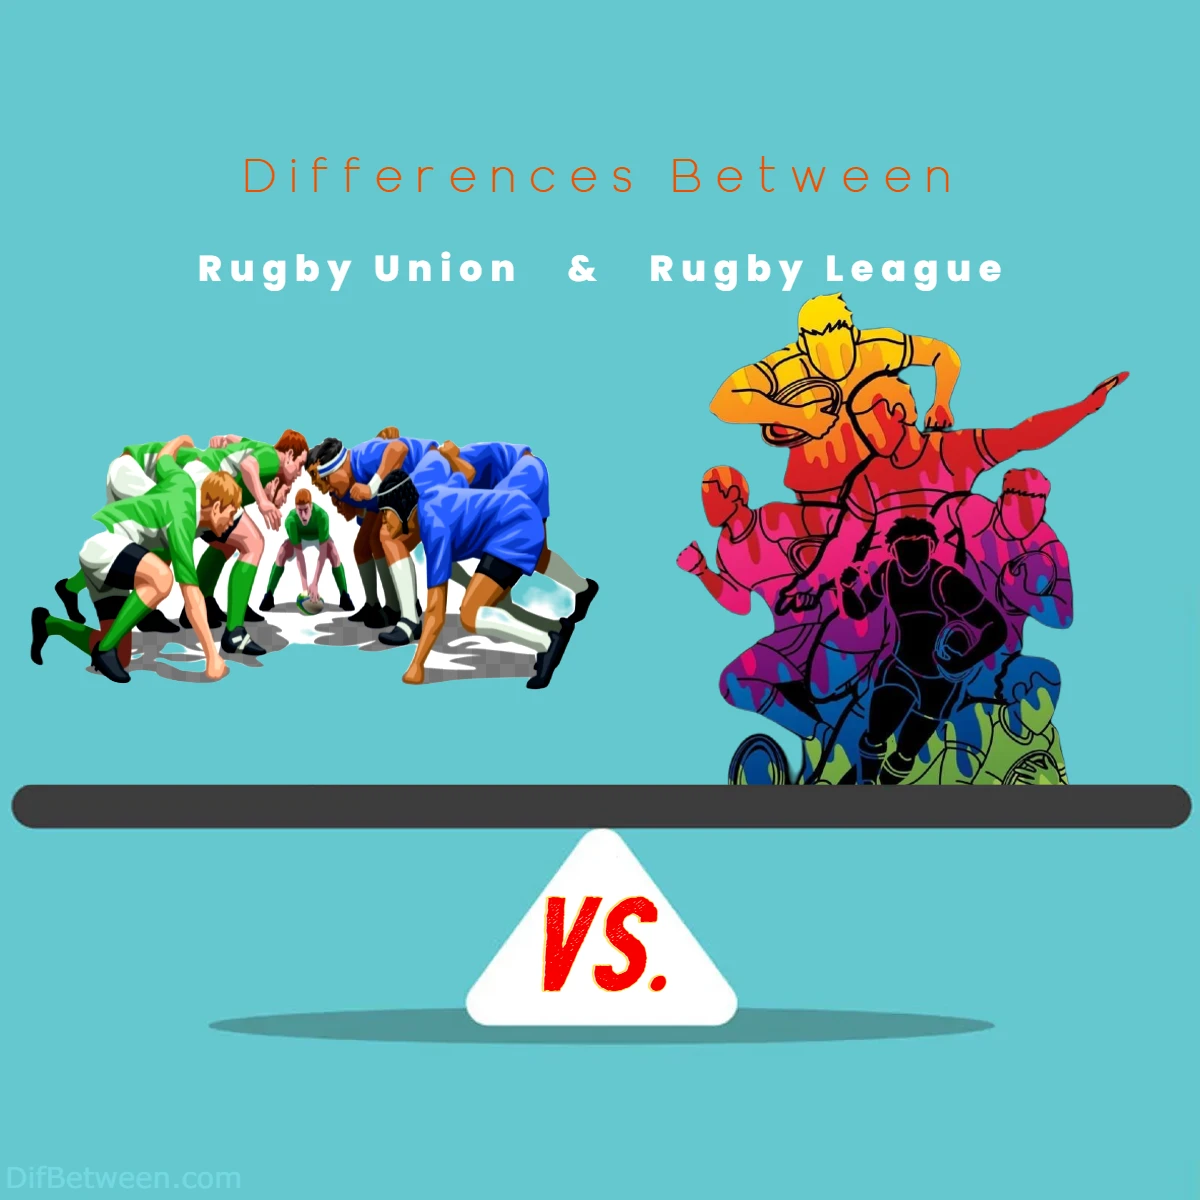 Differences Between Rugby Union vs Rugby League